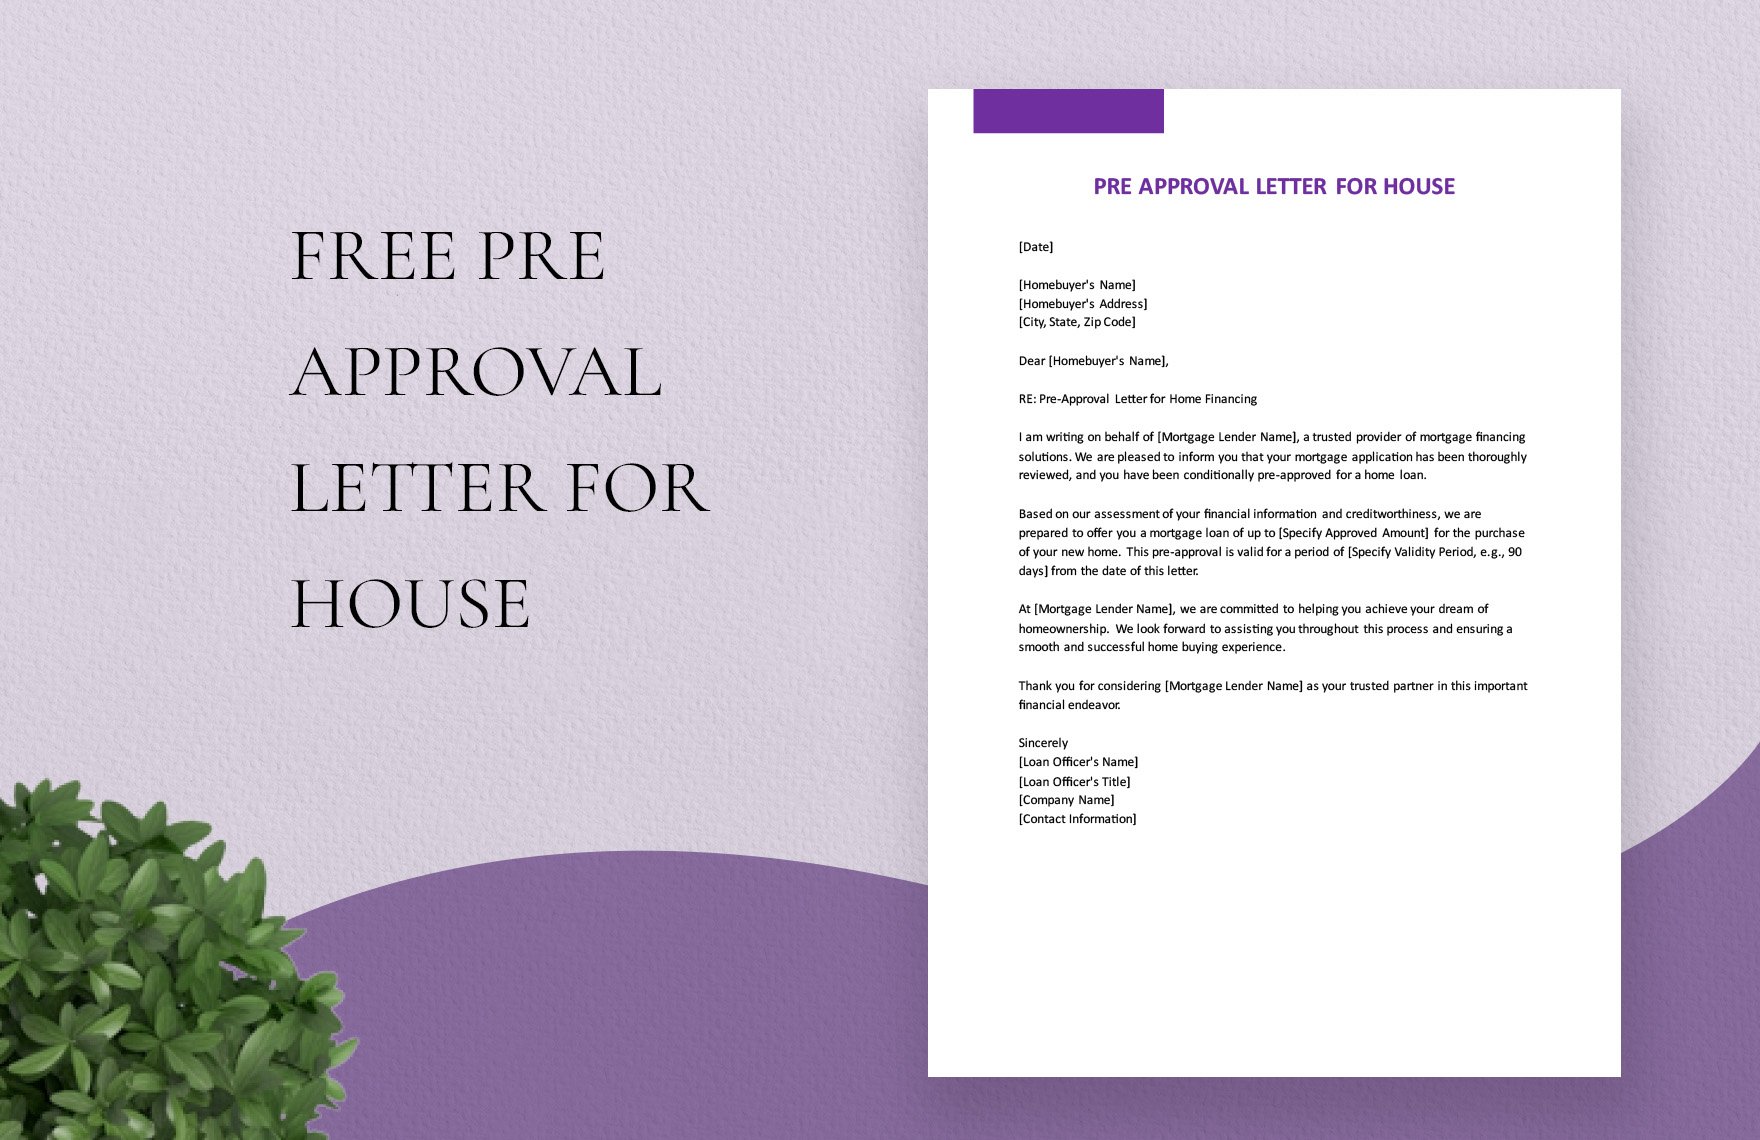 Pre Approval Letter For House